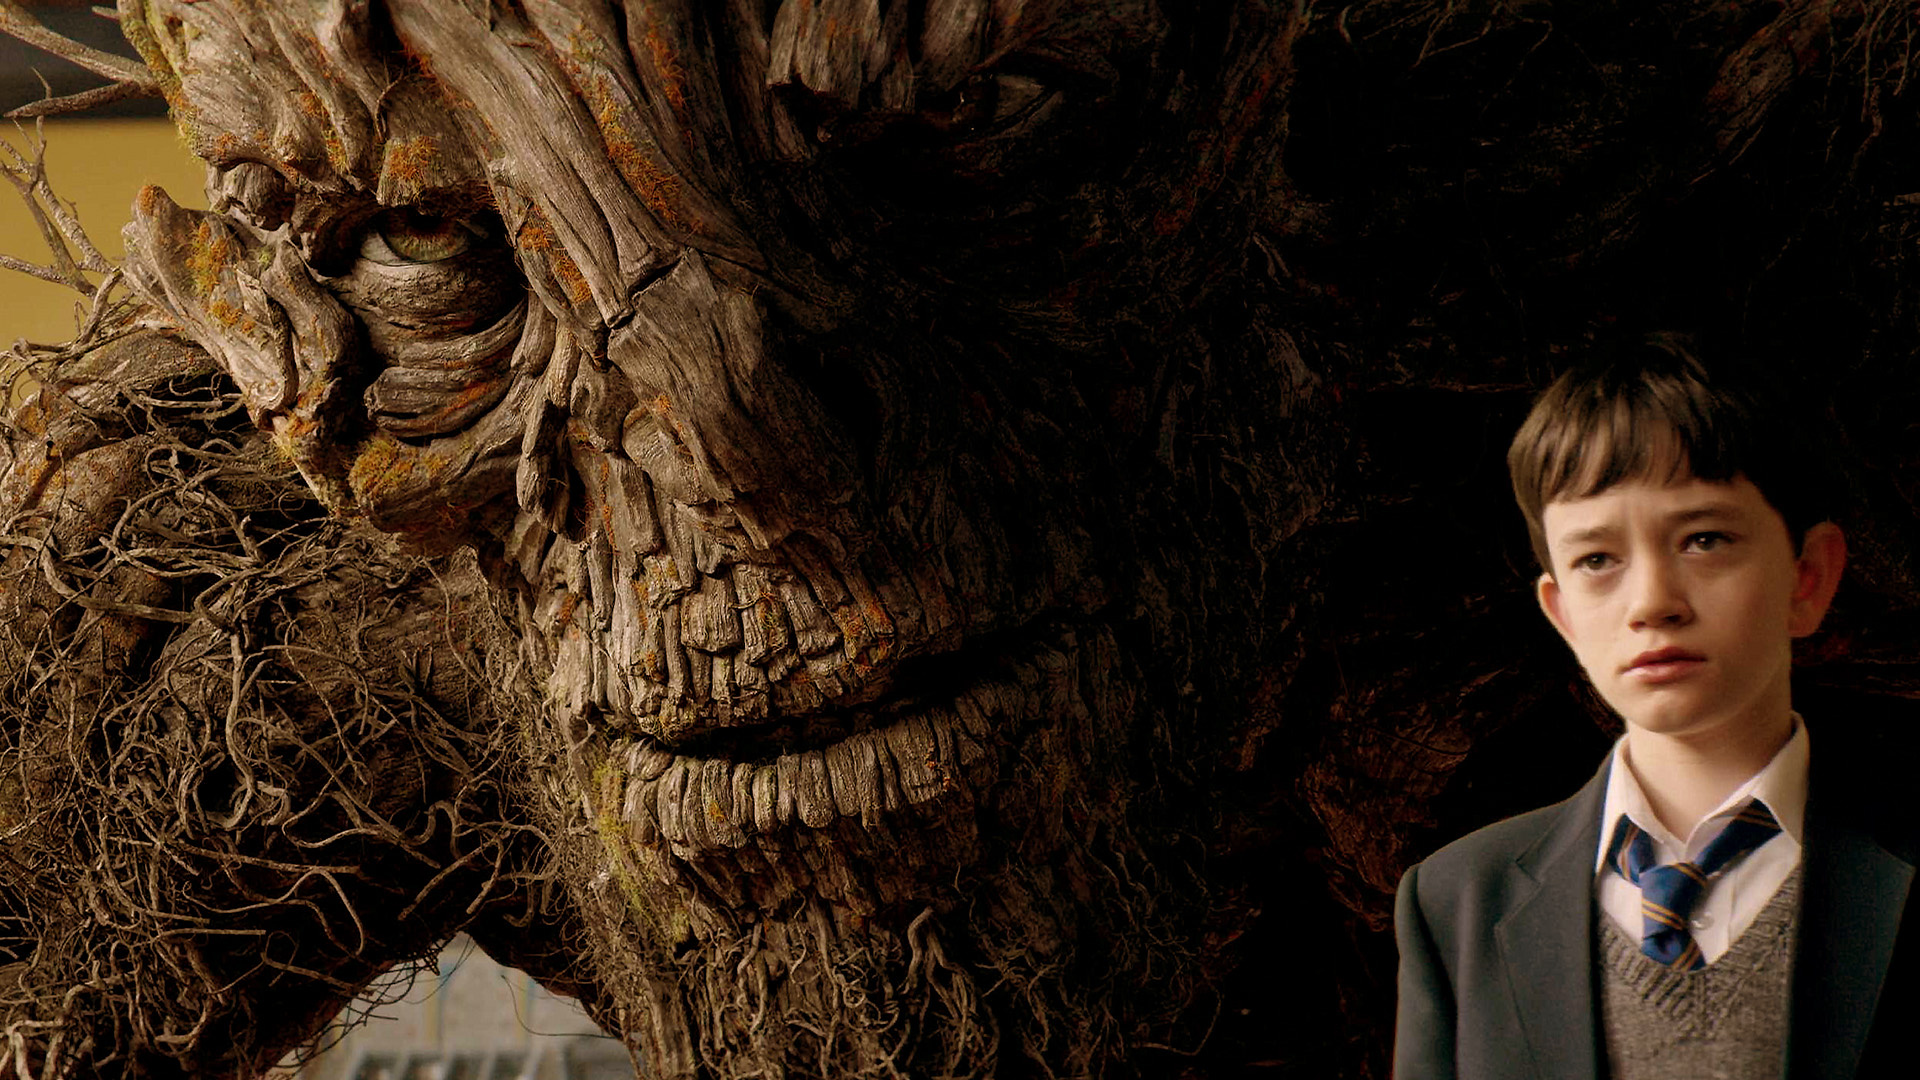 A Monster Calls, HD wallpapers, Emotional journey, Moving, 1920x1080 Full HD Desktop